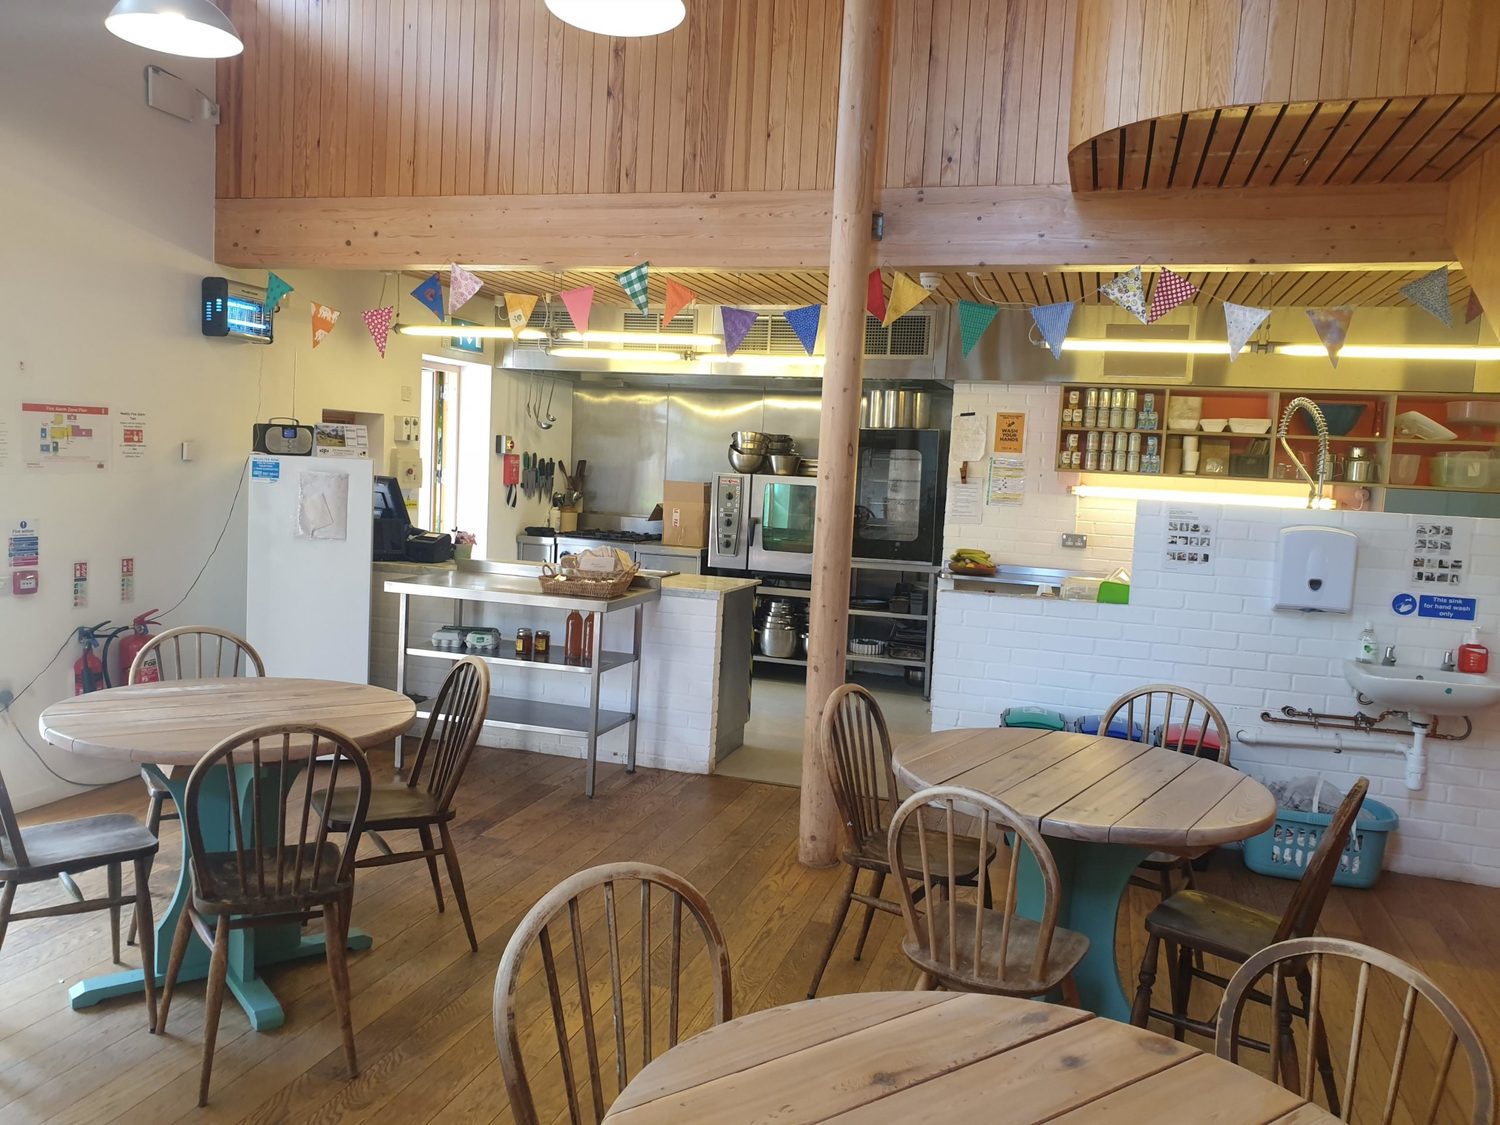 Newly named café ‘Crows Nest Kitchen’ reopens in Grange Village